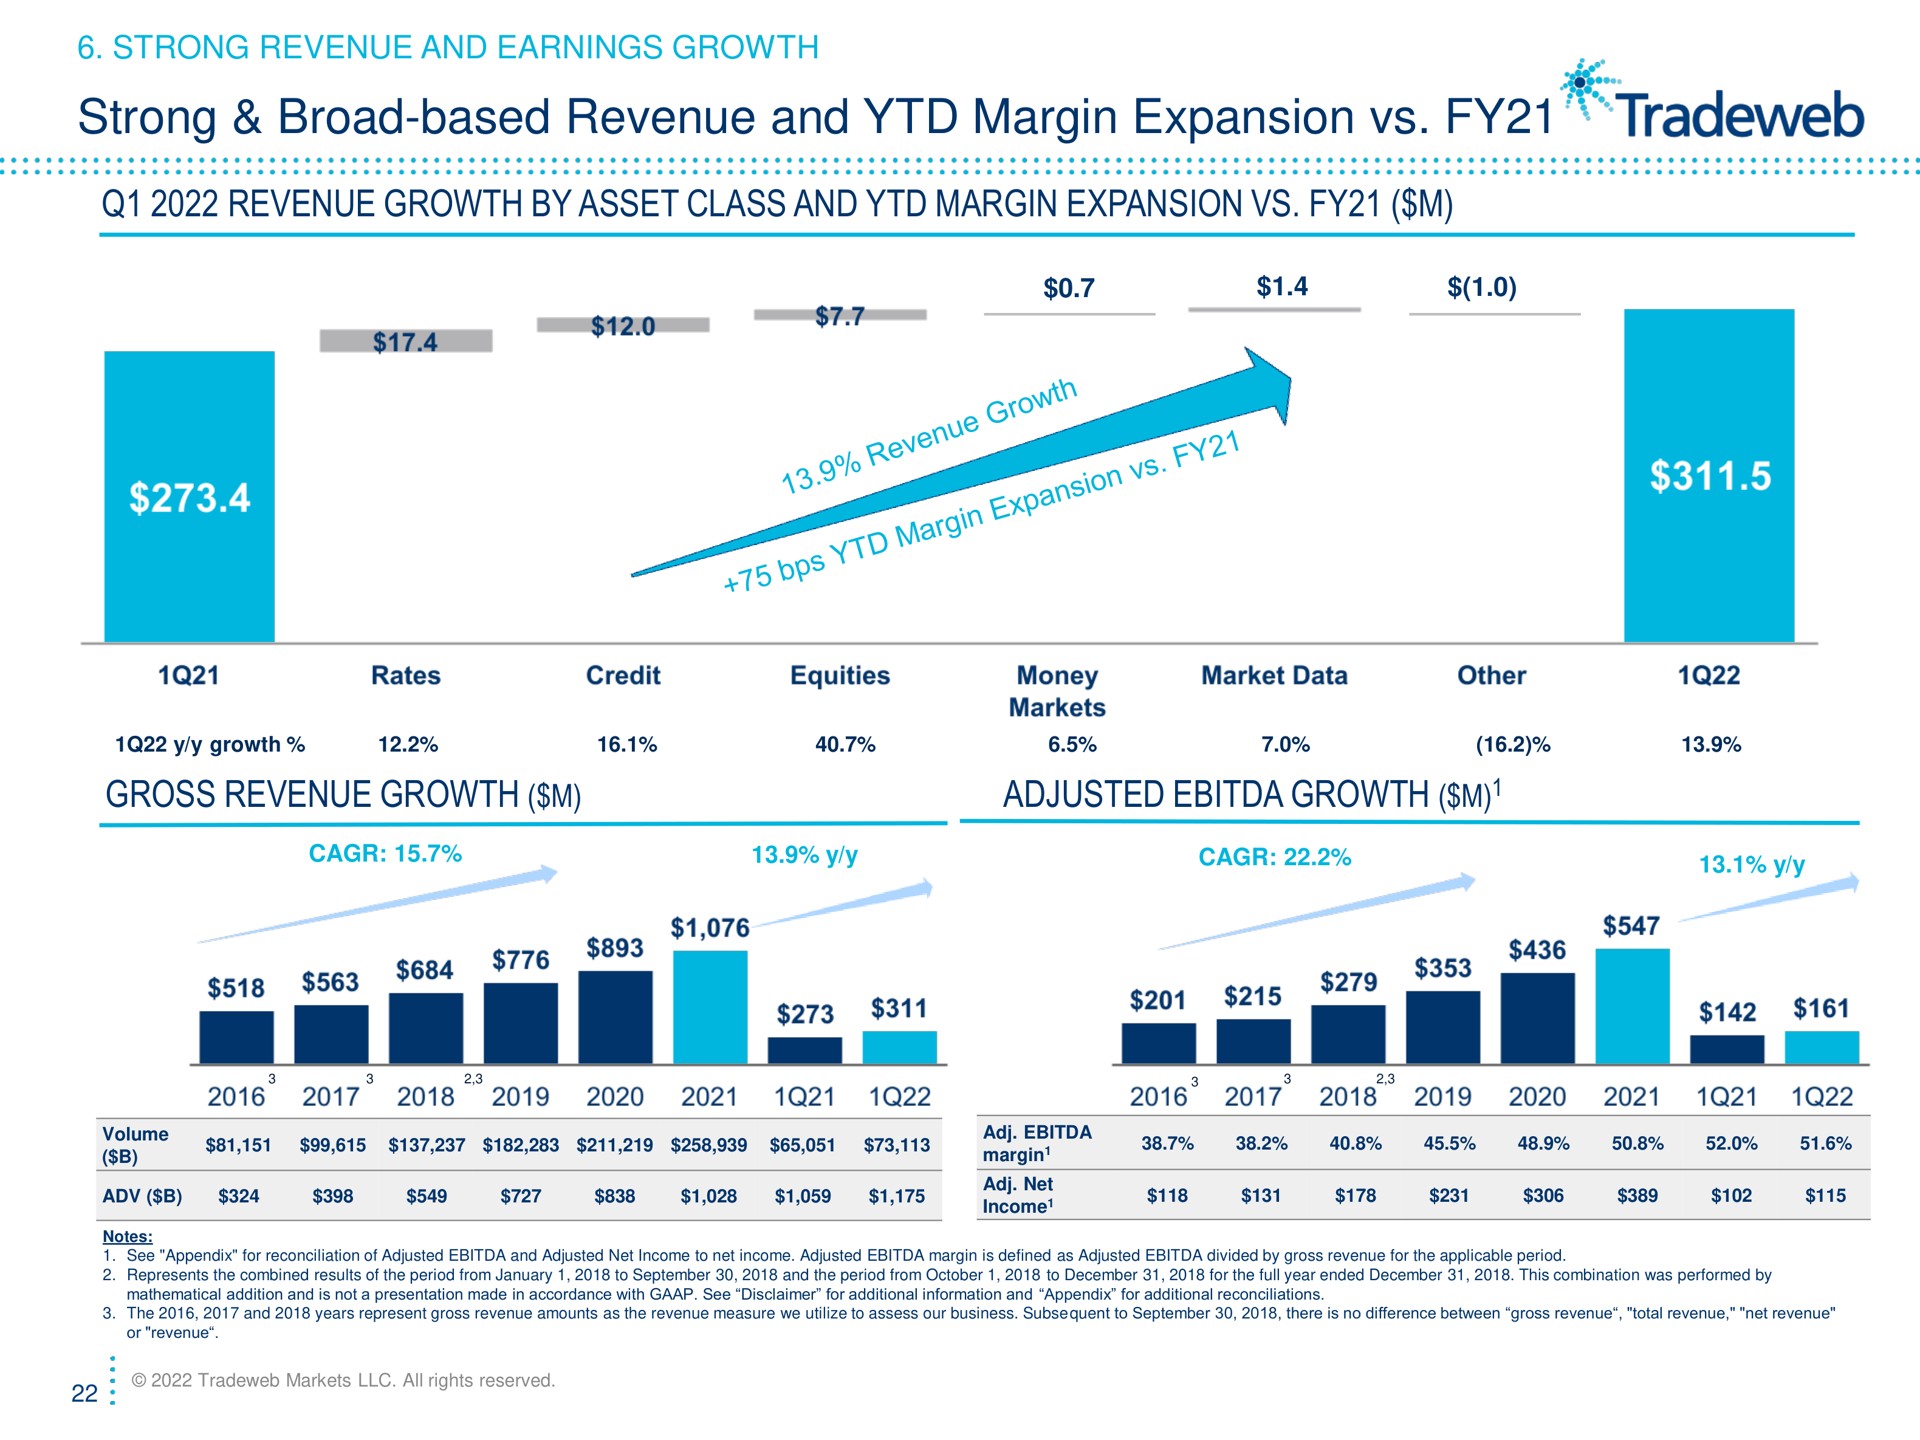 strong broad based revenue and margin expansion revenue growth by asset class and margin expansion gross revenue growth adjusted growth earnings age hah net | Tradeweb